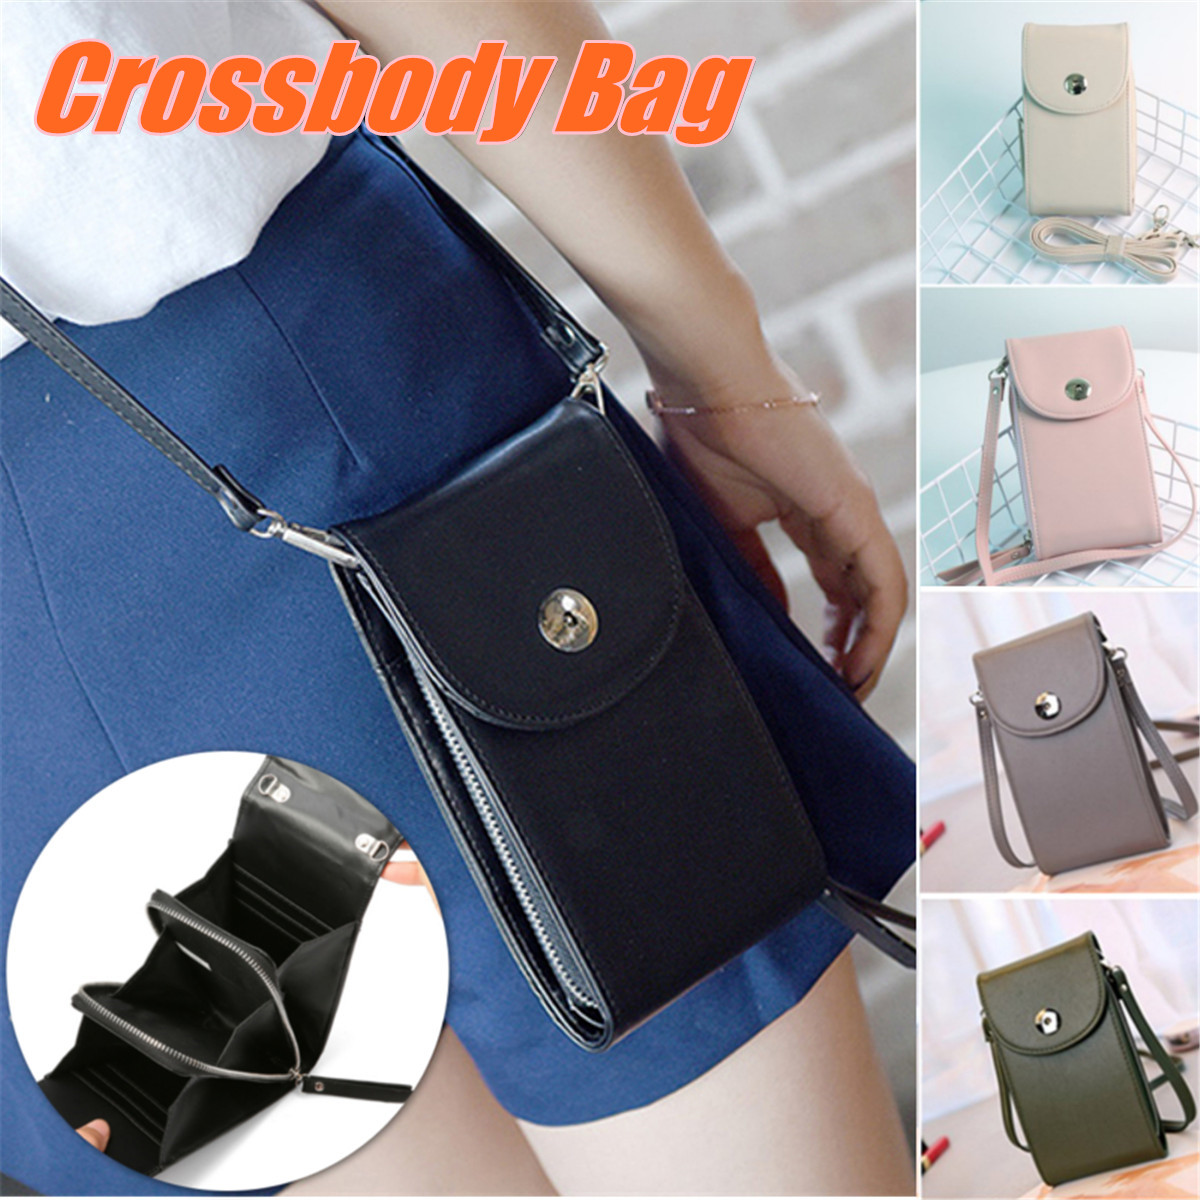 Multifunctional-Three-layer-Waist-Bag-Phone-Bag-For-47-55-Inch-Smart-Phone-for-iPhone-X-Xiaomi-Non-o-1633377-1